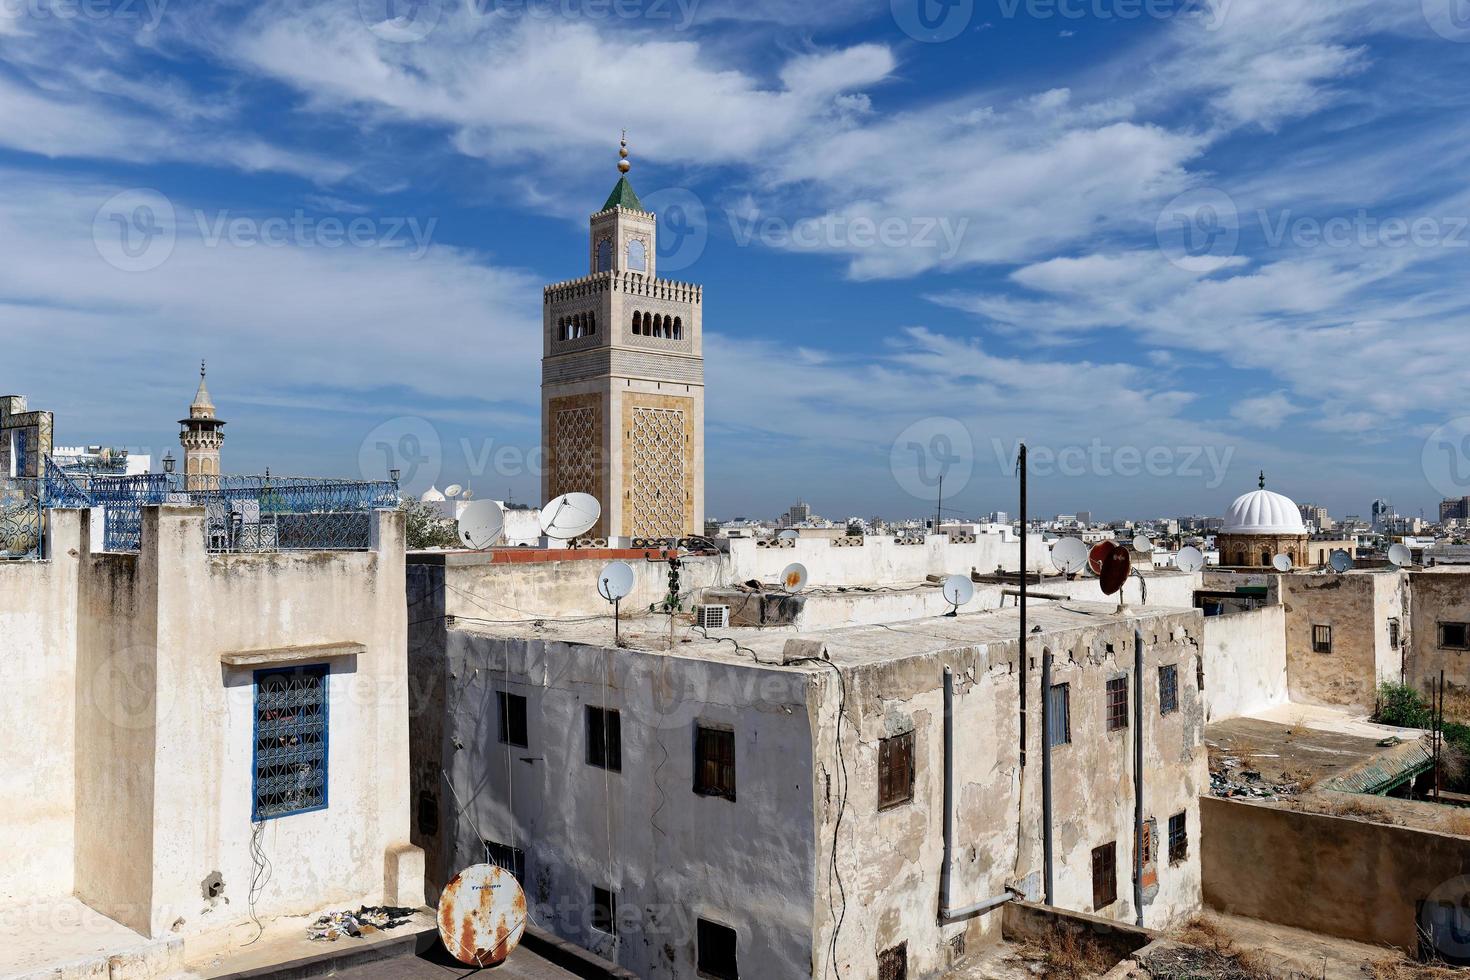 Tunis, Tunisia 2022.09.30 View of the Old Medina of Tunis, Unesco. Around 700 monuments, including palaces, mosques, mausoleums, madrasas and fountains, testify to this remarkable historic city. photo